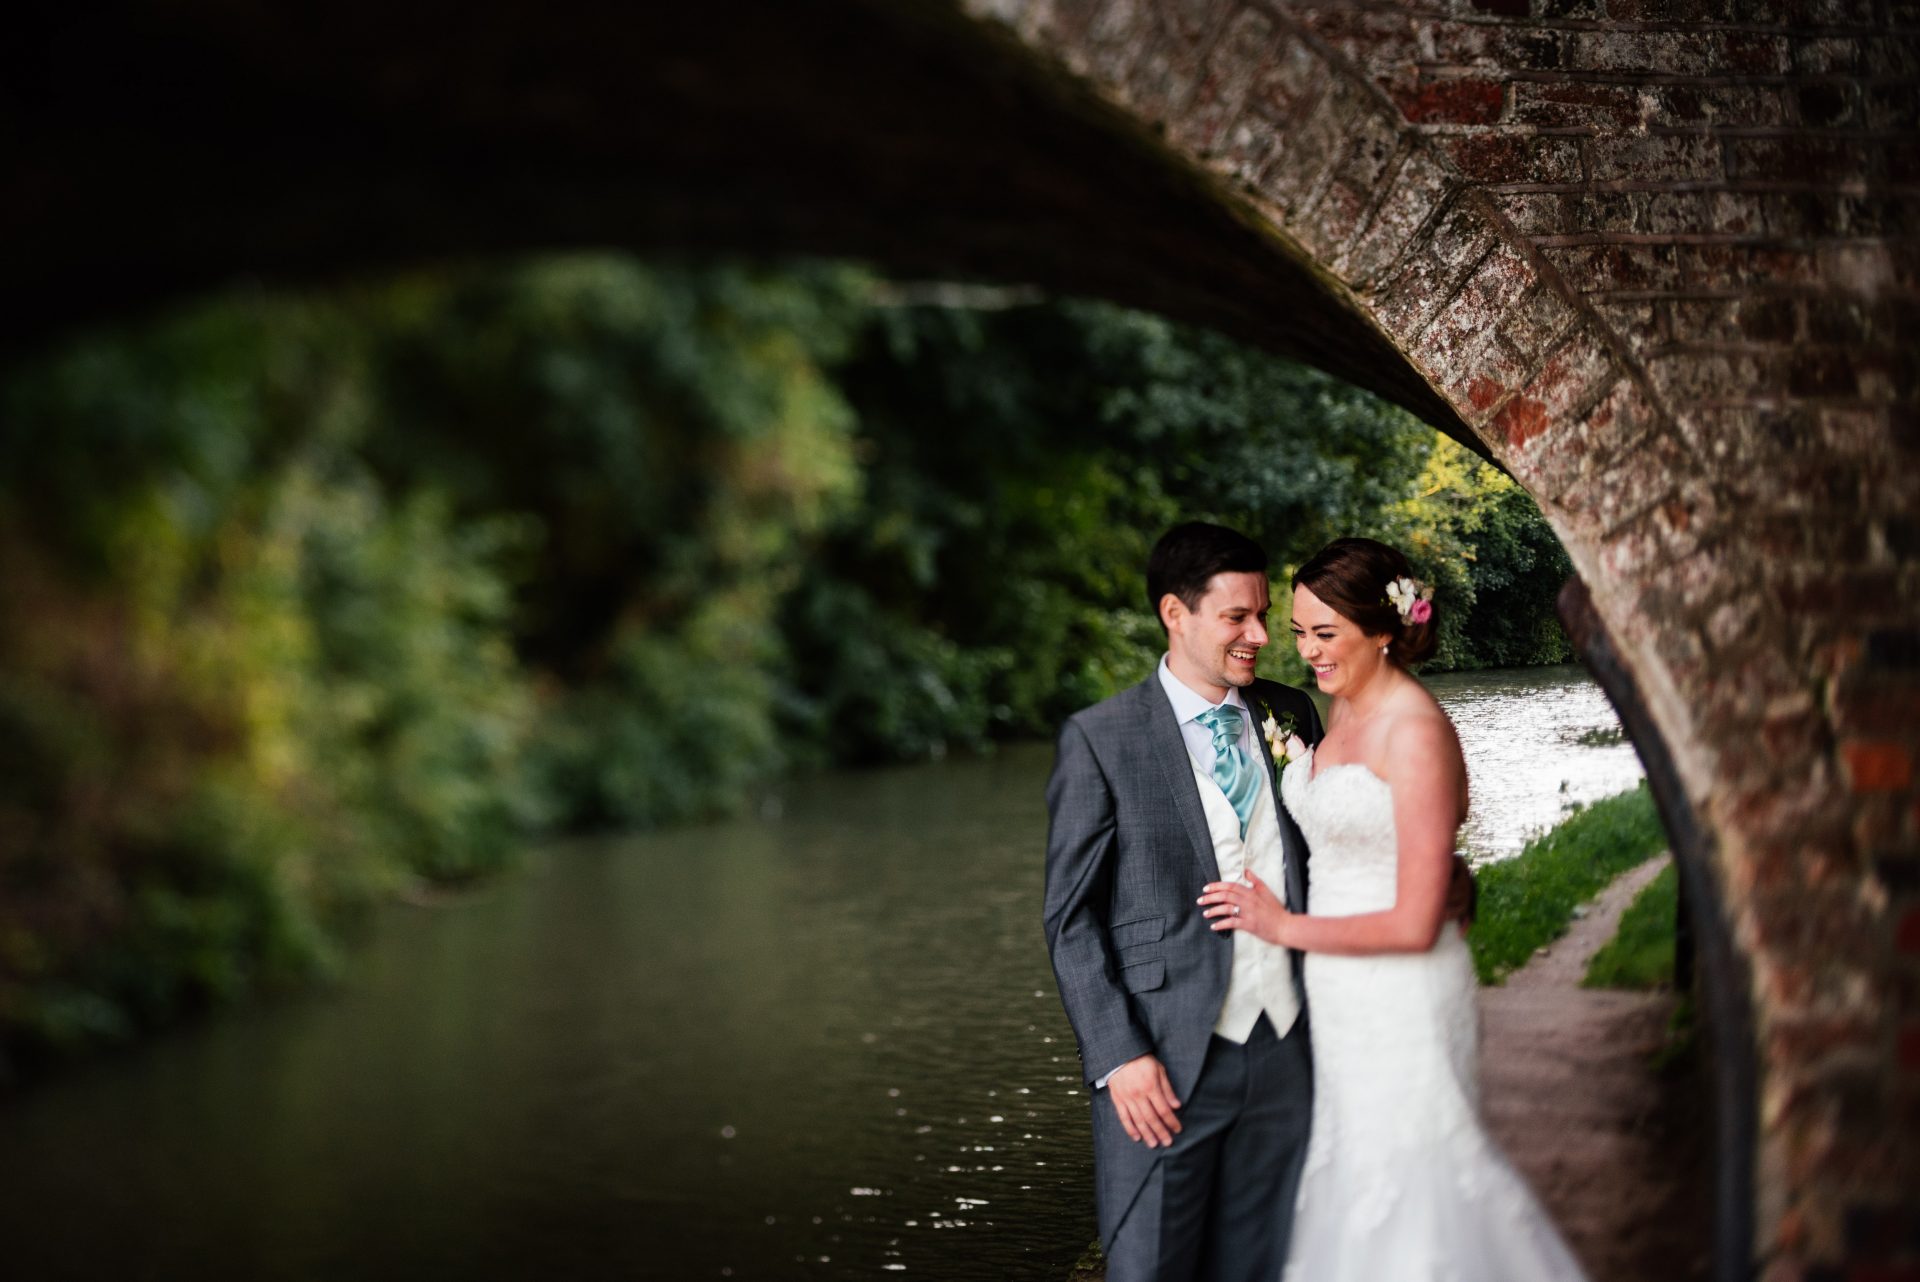 Wedding shot by the canal